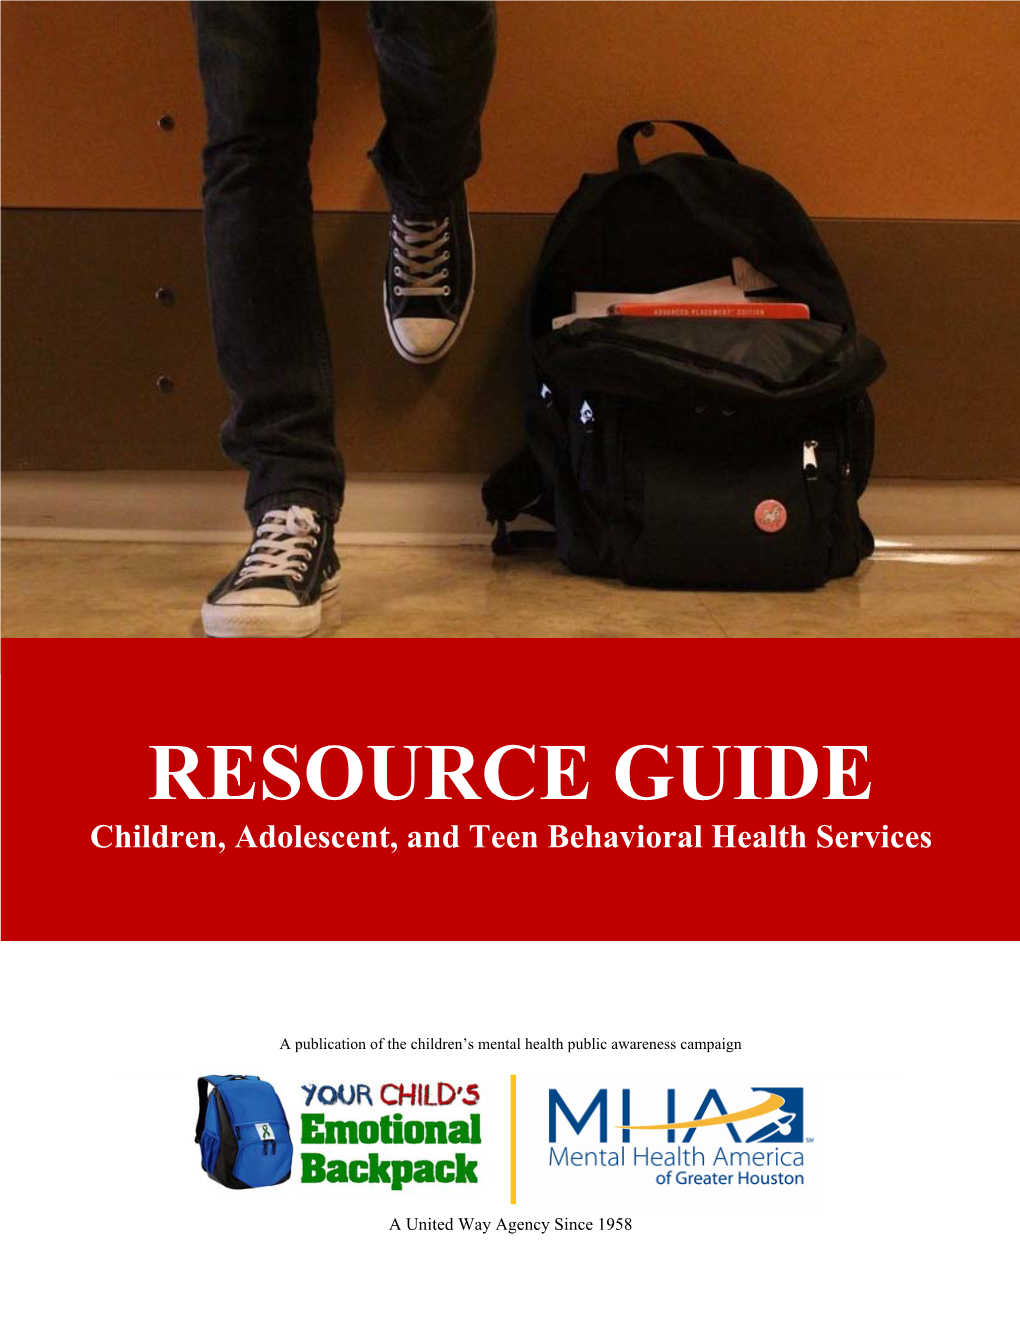 Mental Health Resources Guide